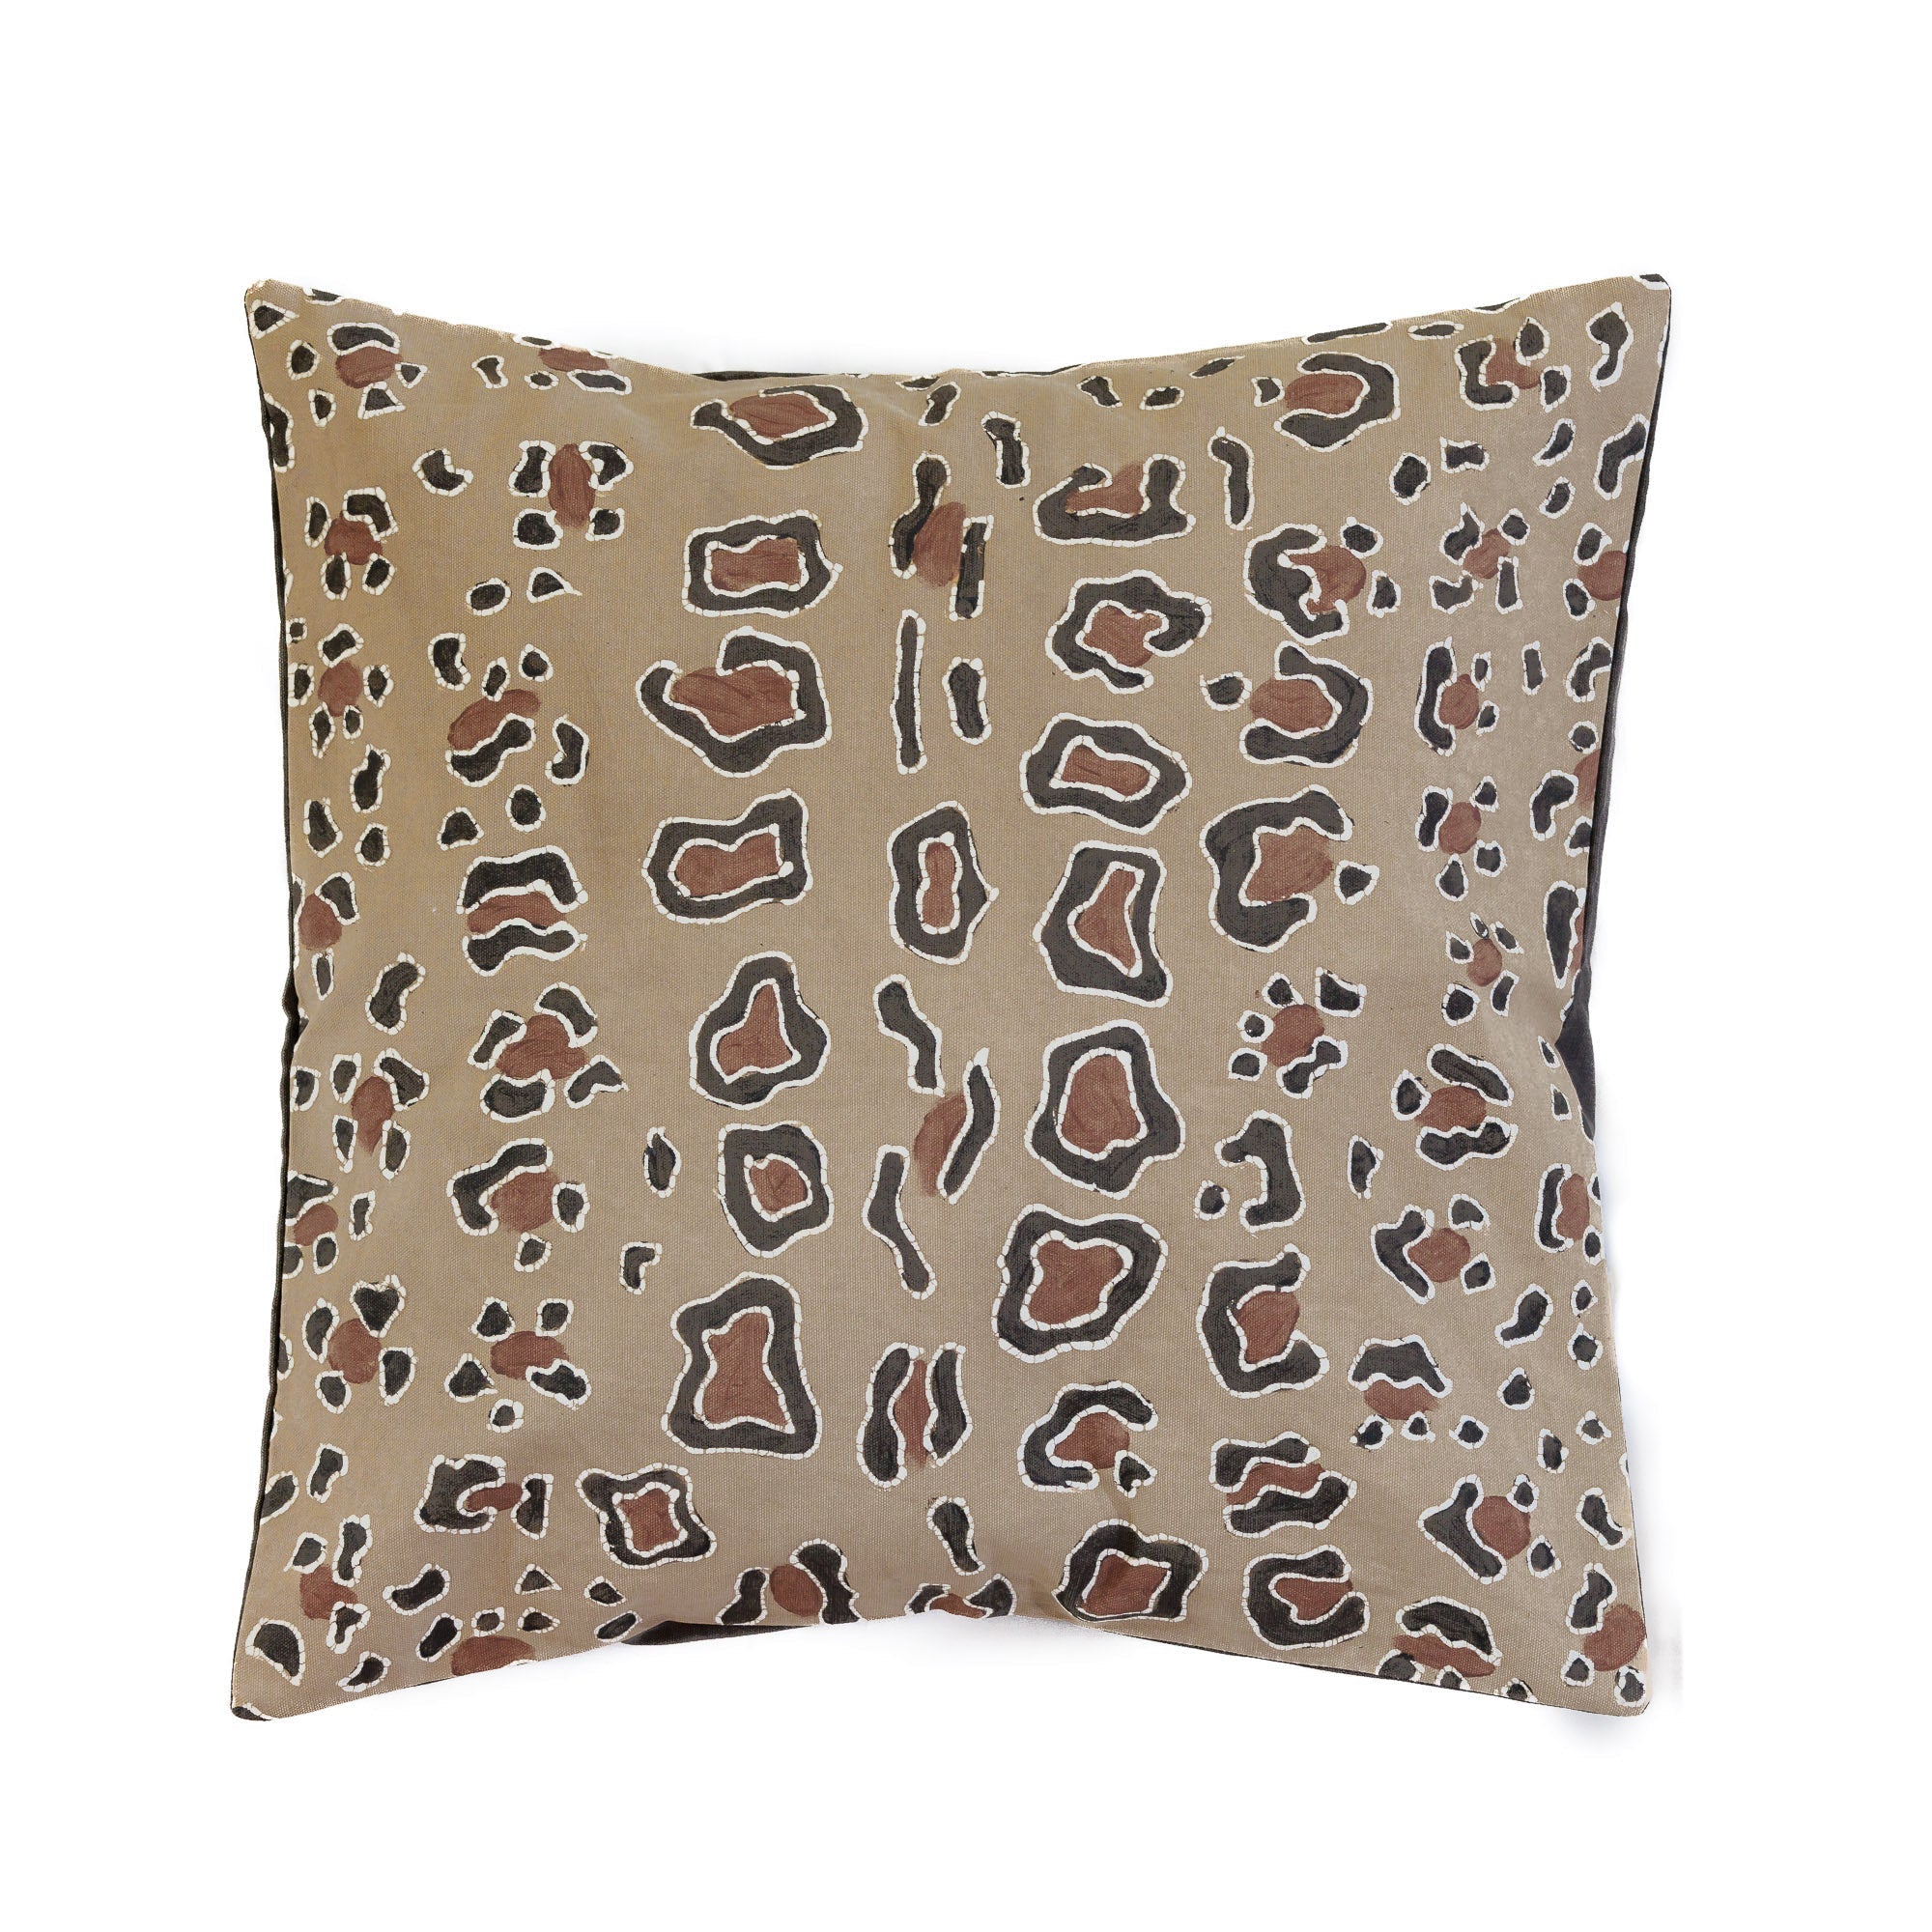 IMPERFECT SALE : Mkupo Leopard Cushion Cover Small - Hand Painted by TRIBAL TEXTILES - Handcrafted Home Decor Interiors - African Made